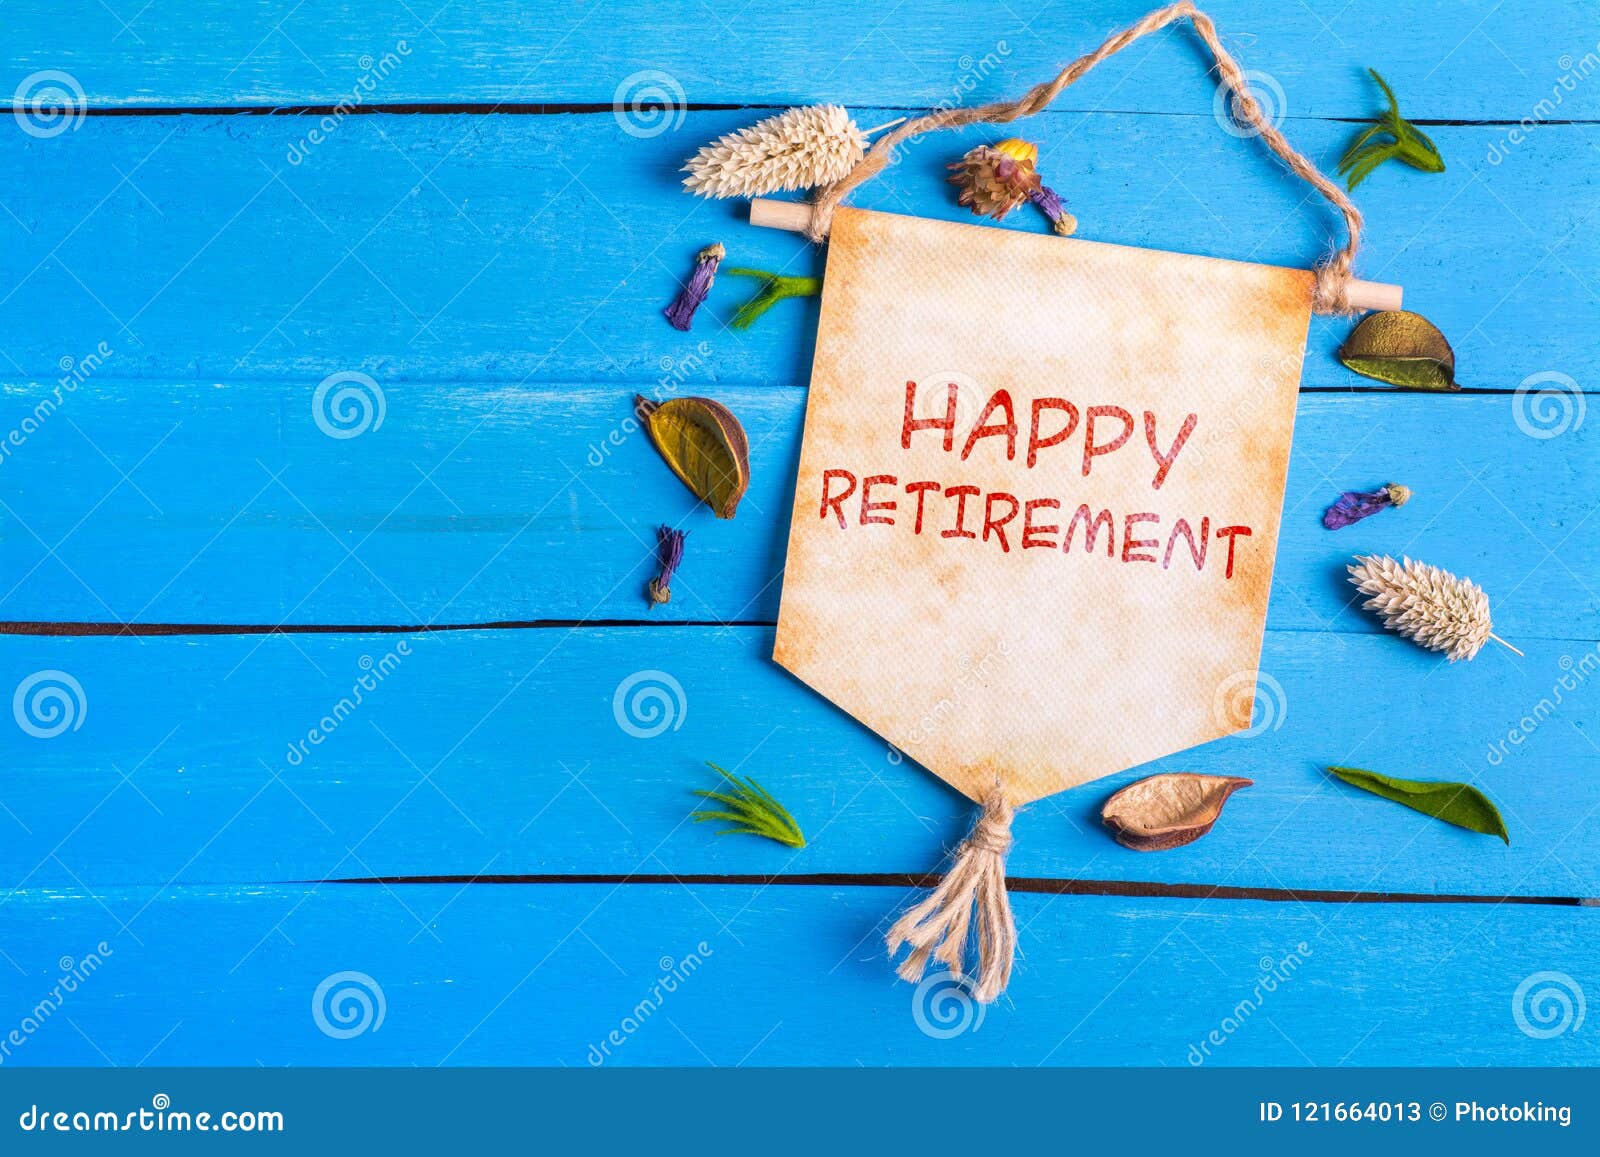 happy retirement text on paper scroll